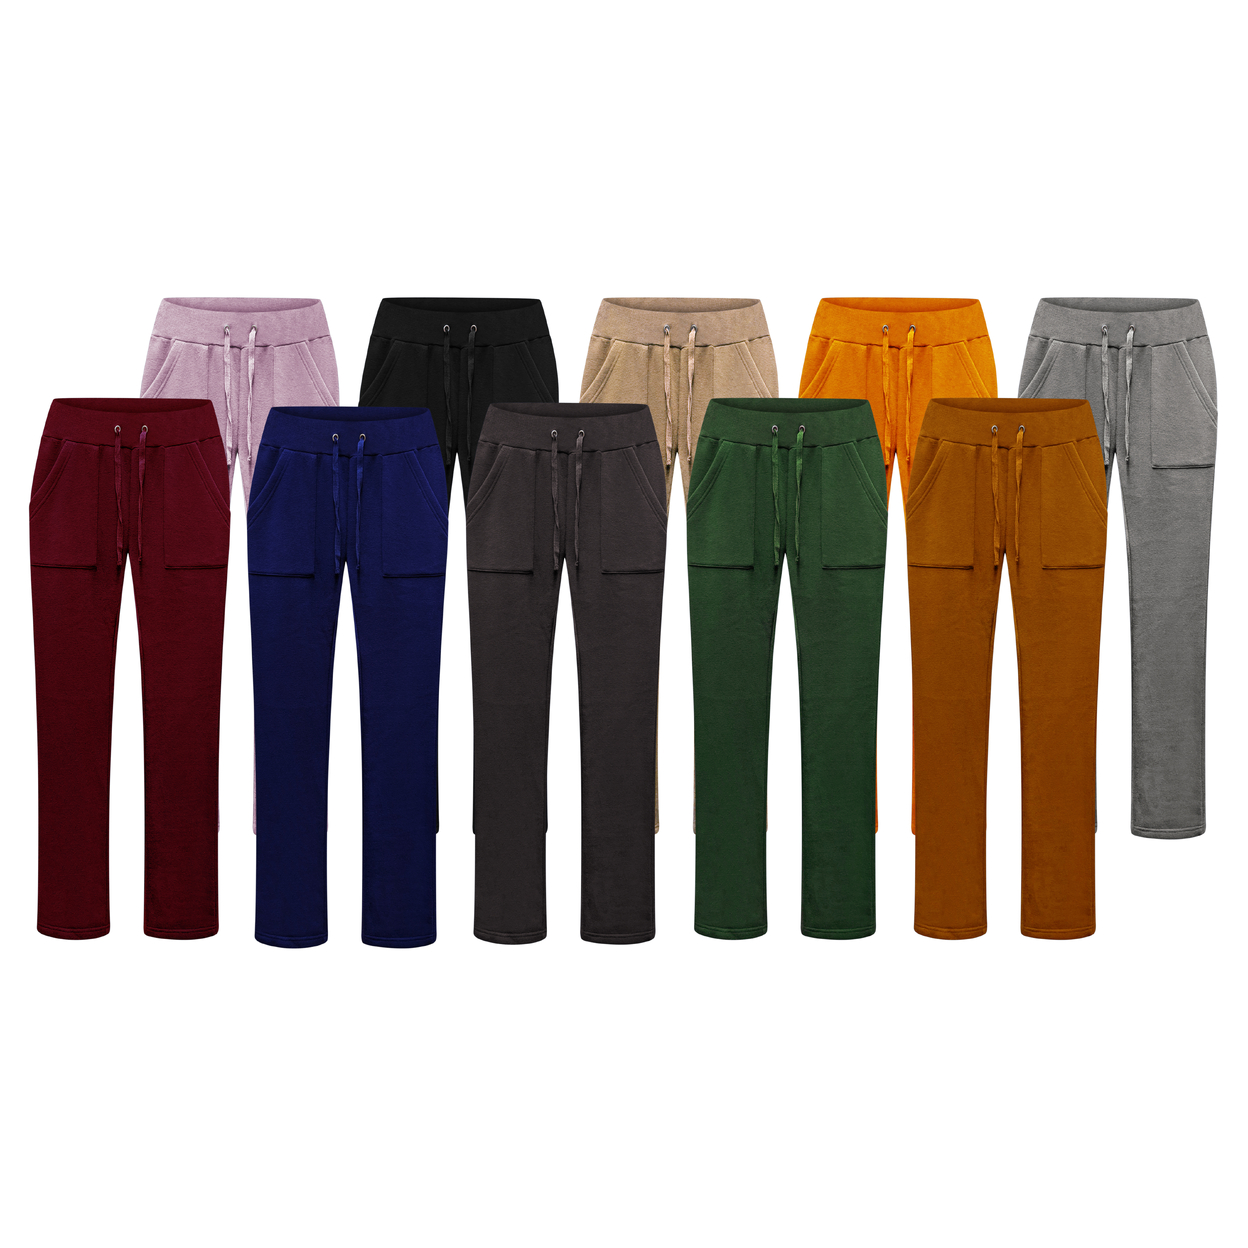 Women's Ultra Soft Cozy Fleece Lined Elastic Waistband Terry Knit Pants - Assorted, X-large